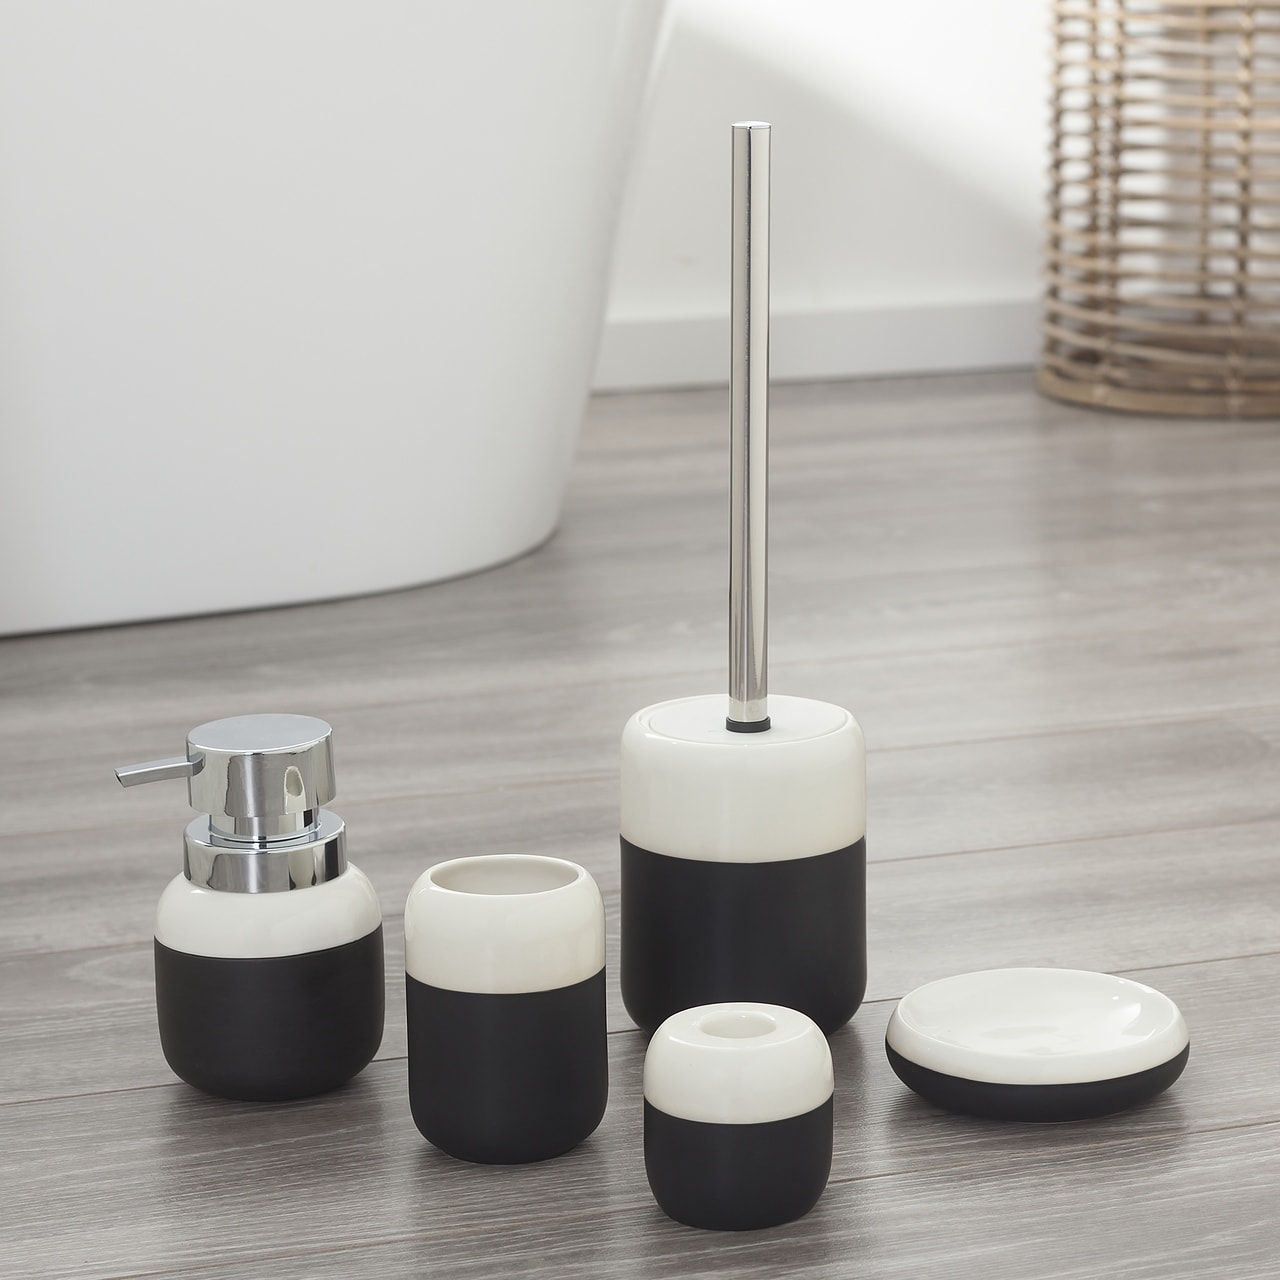 Sealskin 5 Piece Bathroom Accessories Set Sphere Black And White Porcelain On Sale Overstock 23477419